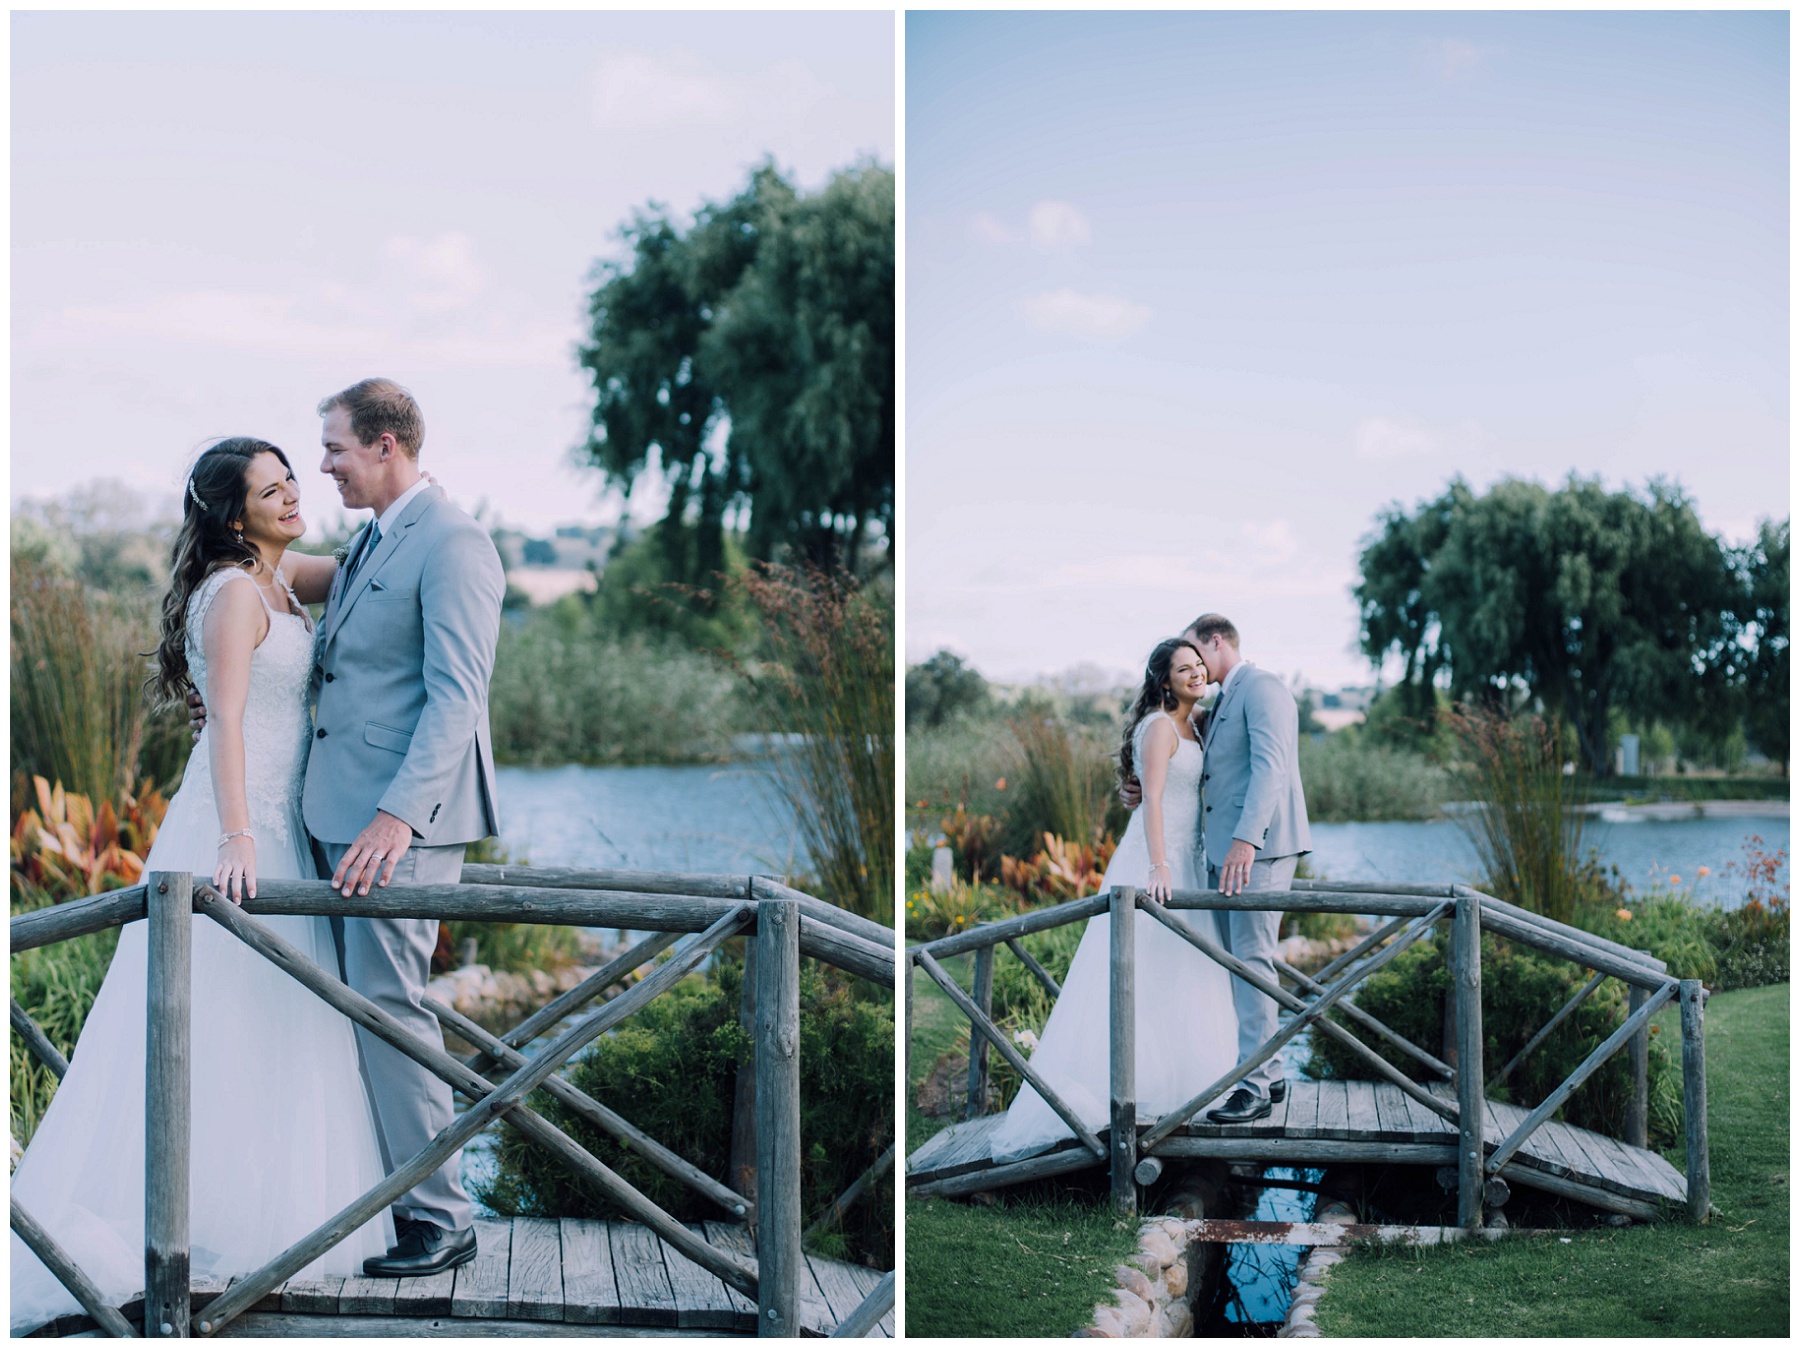 Ronel Kruger Cape Town Wedding and Lifestyle Photographer_8821.jpg